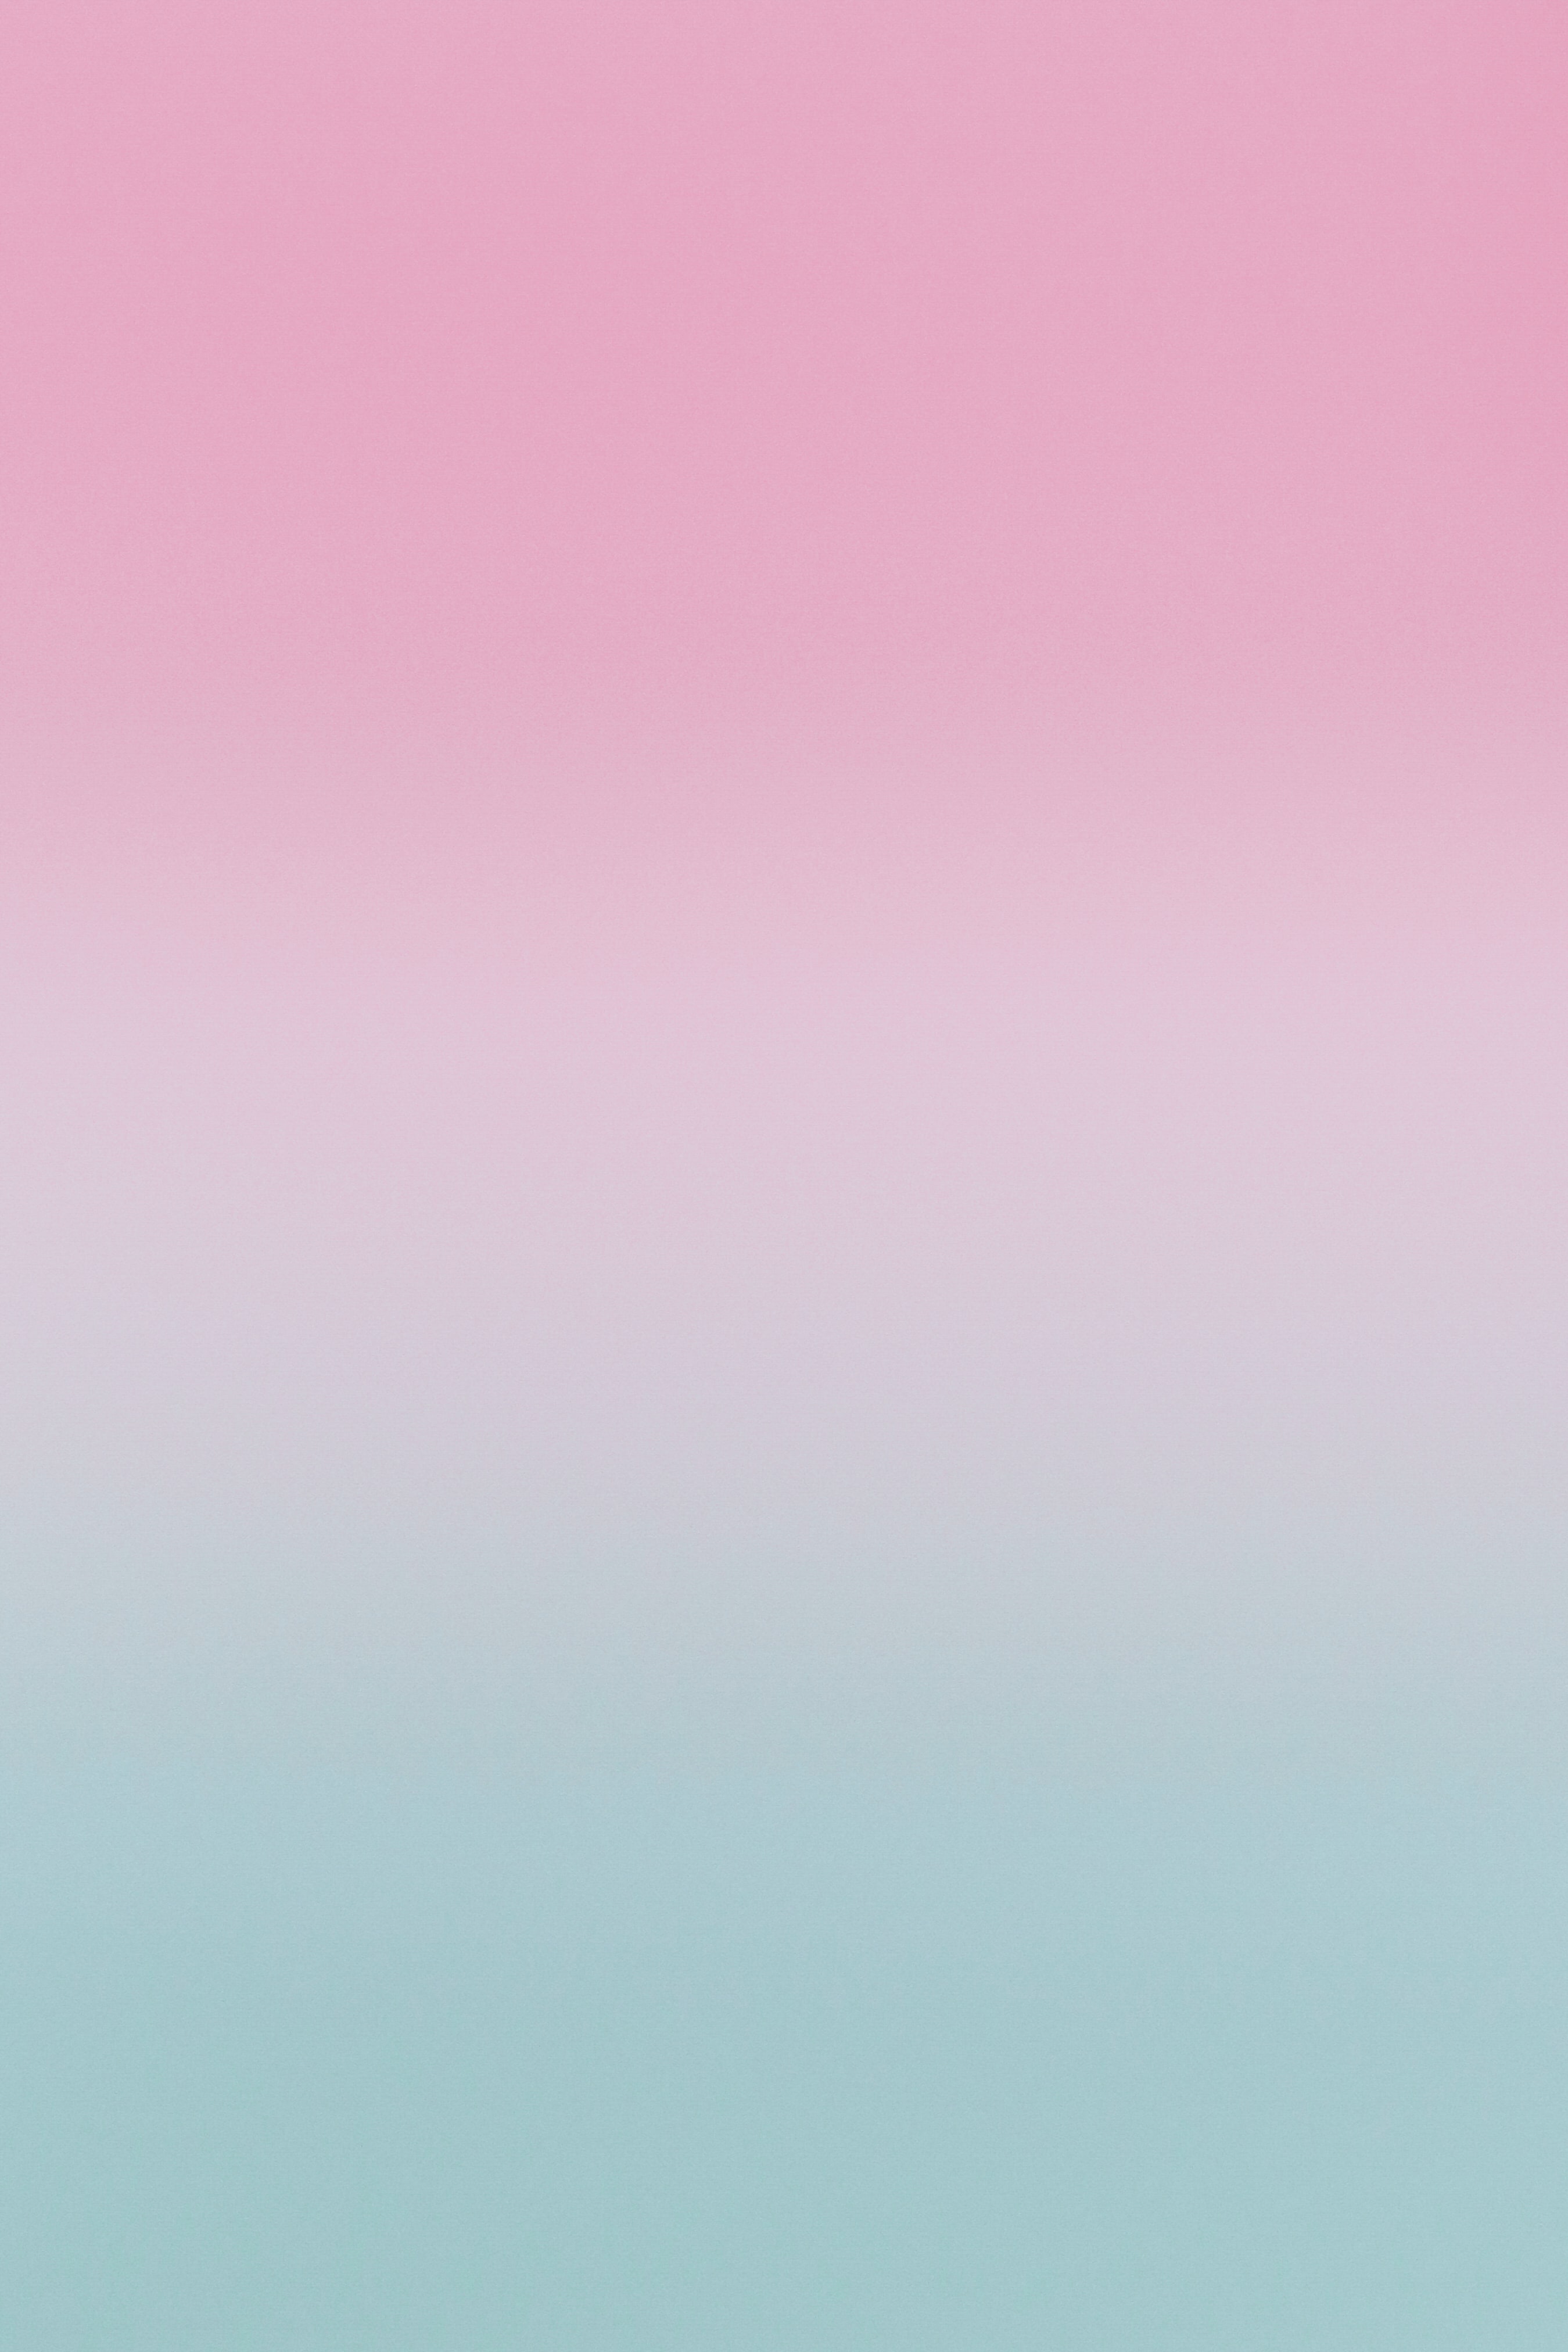 smooth, pink, blur, gradient, blue, abstract